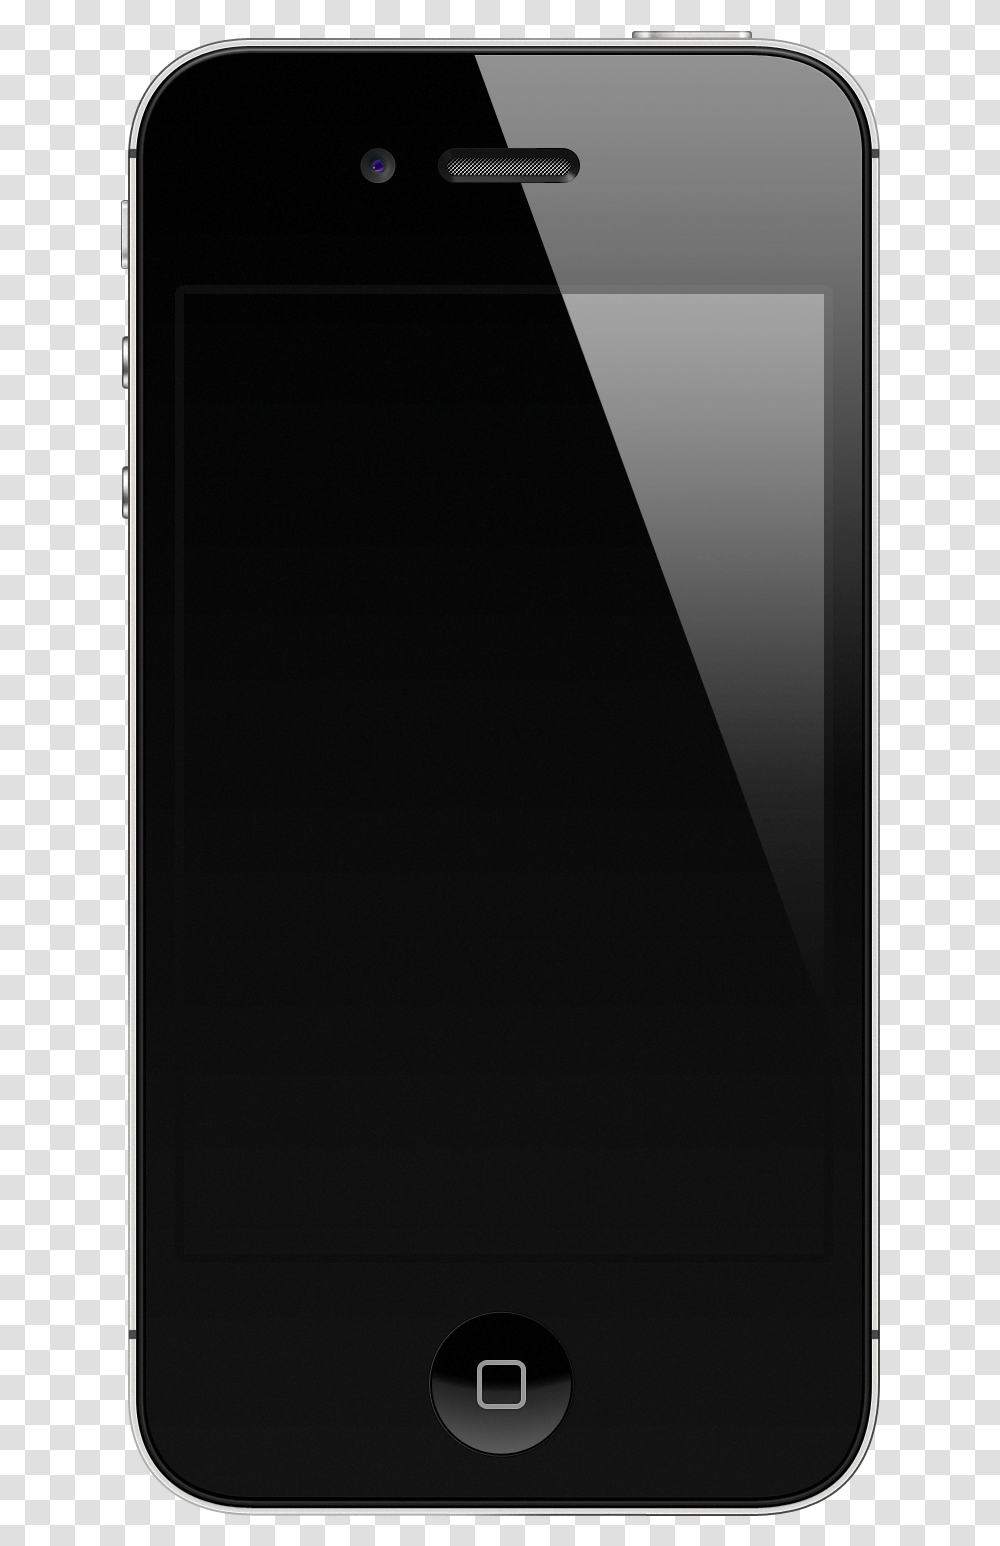 Blank Iphone Screen & Clipart Free Download Phones With A Black Screen, Mobile Phone, Electronics, Cell Phone, LCD Screen Transparent Png